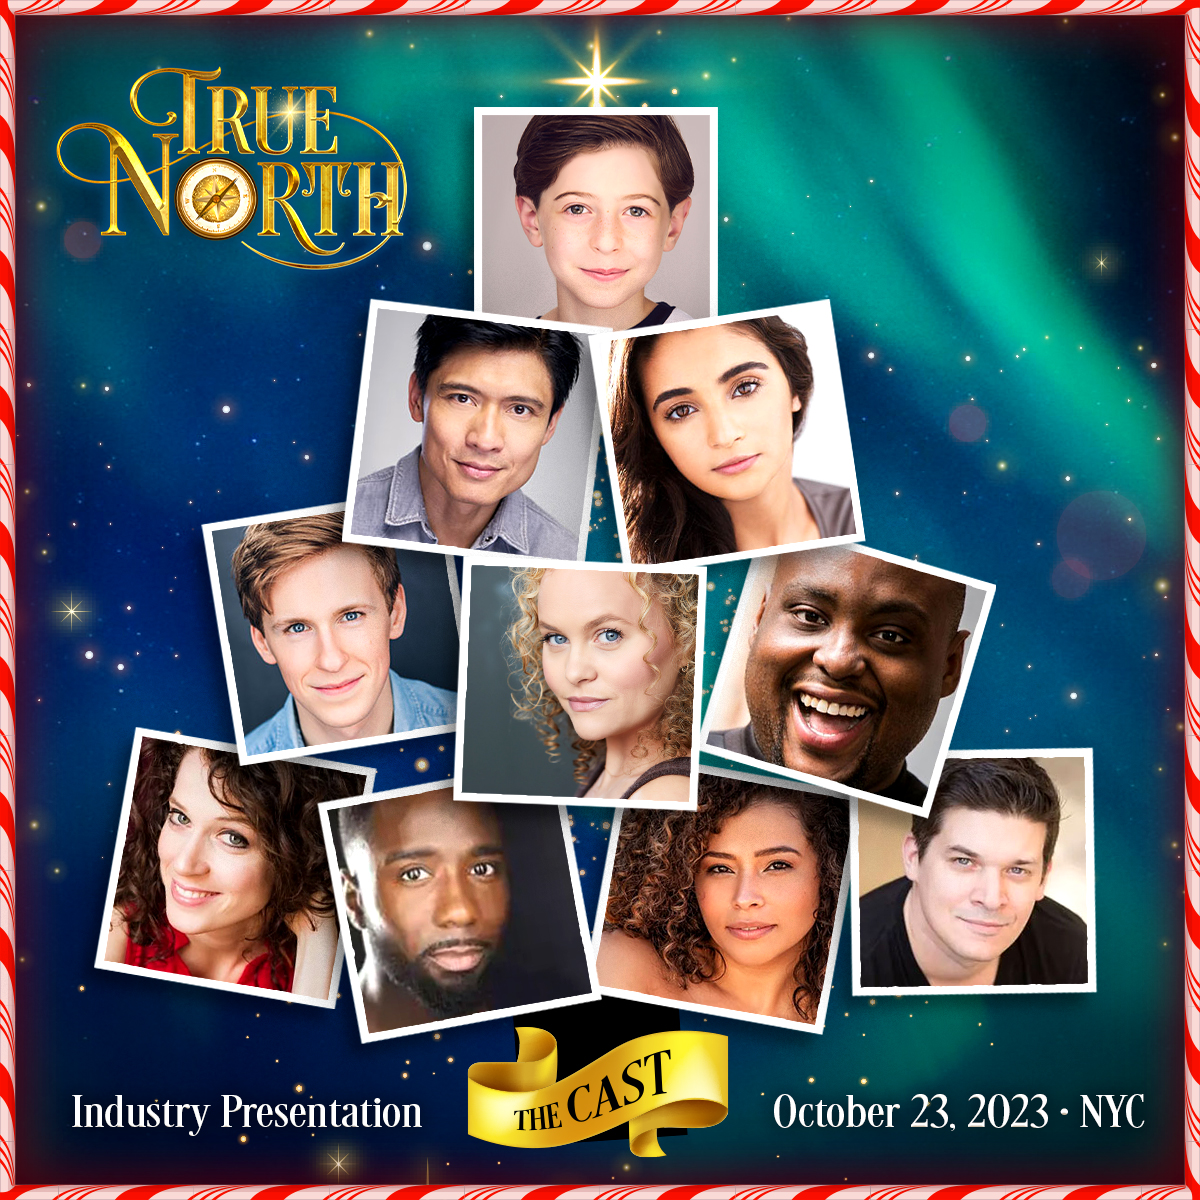 Announcing our *brilliant* cast for the upcoming industry reading of TRUE NORTH featuring Paolo Montalban, Michael Deaner, Salena Qureshi, Charlie Franklin, Amanda Jane Cooper, Major Attaway, Paige Faure, John Edwards, Cherry Torres, and Mike Backes. (Casting by Eisenberg/Beans Casting)